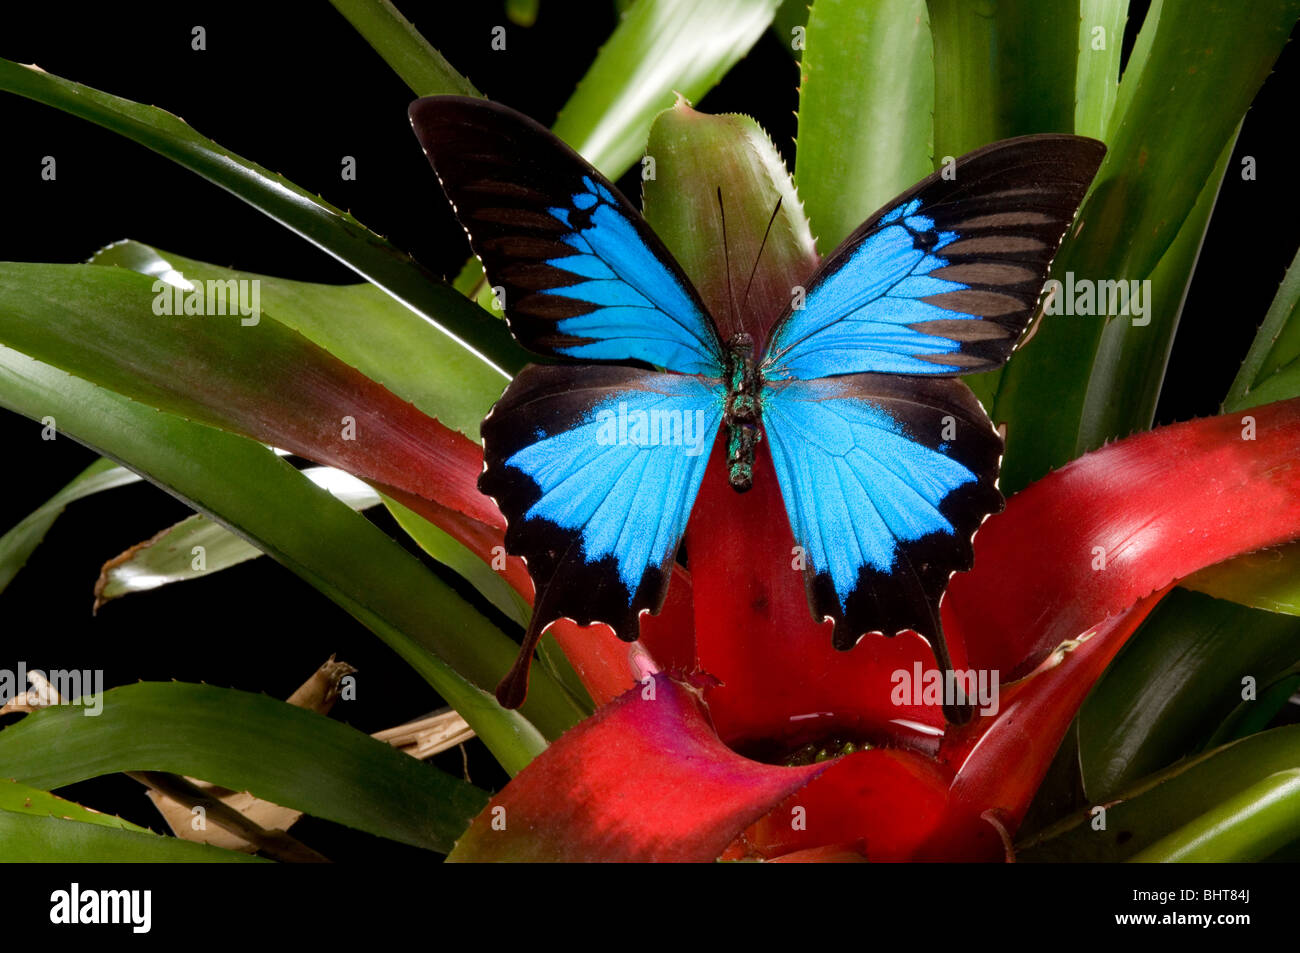 Dunk Island or Ulysses butterfly on water trapping plant Stock Photo